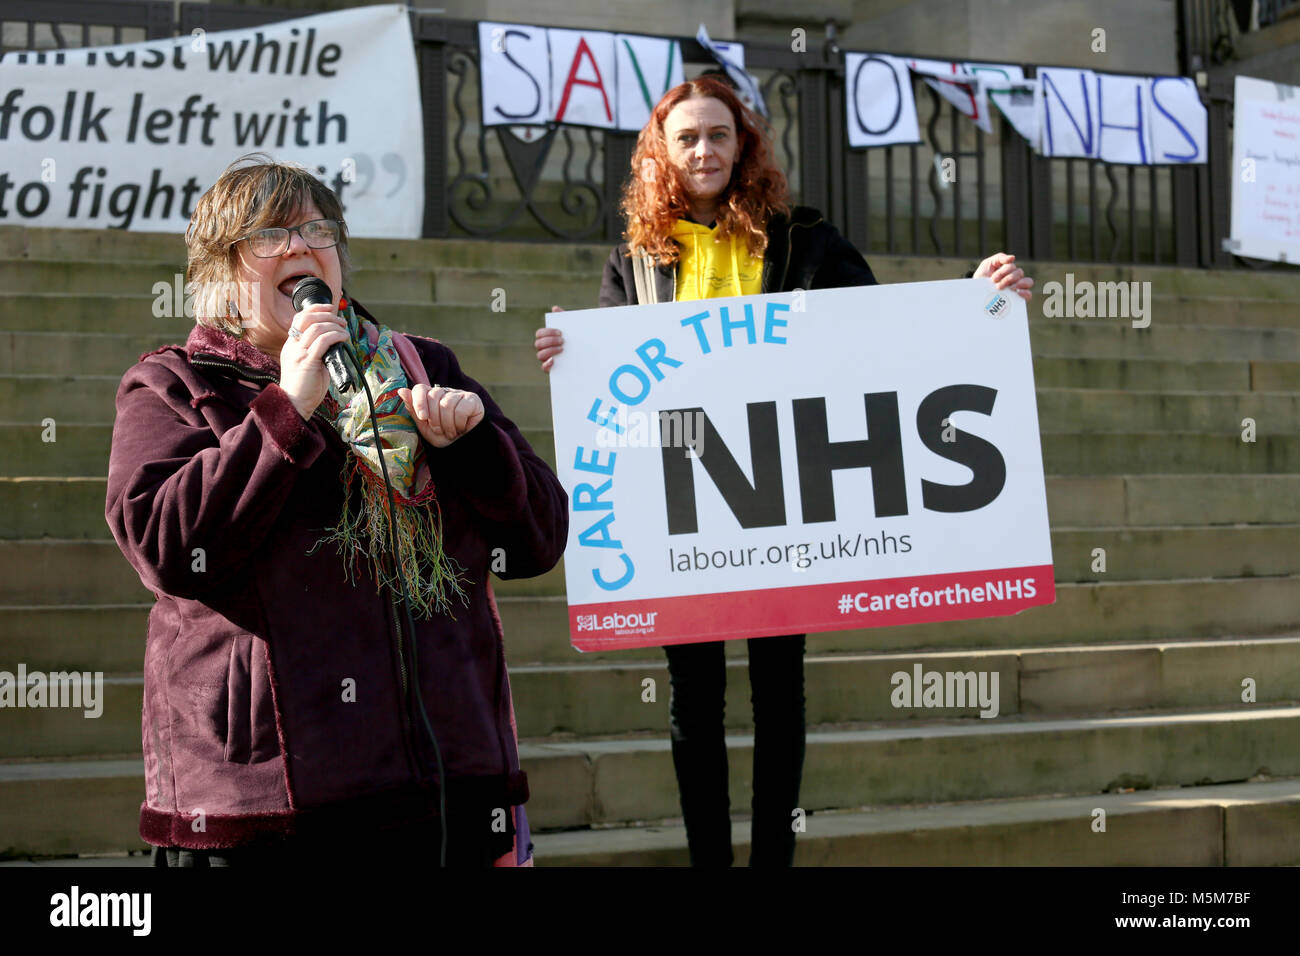 Karen Reisman speaking at a rally to defend the NHS in Bolton, 24th February, 2018 (C)Barbara Cook/Alamy Live News Stock Photo